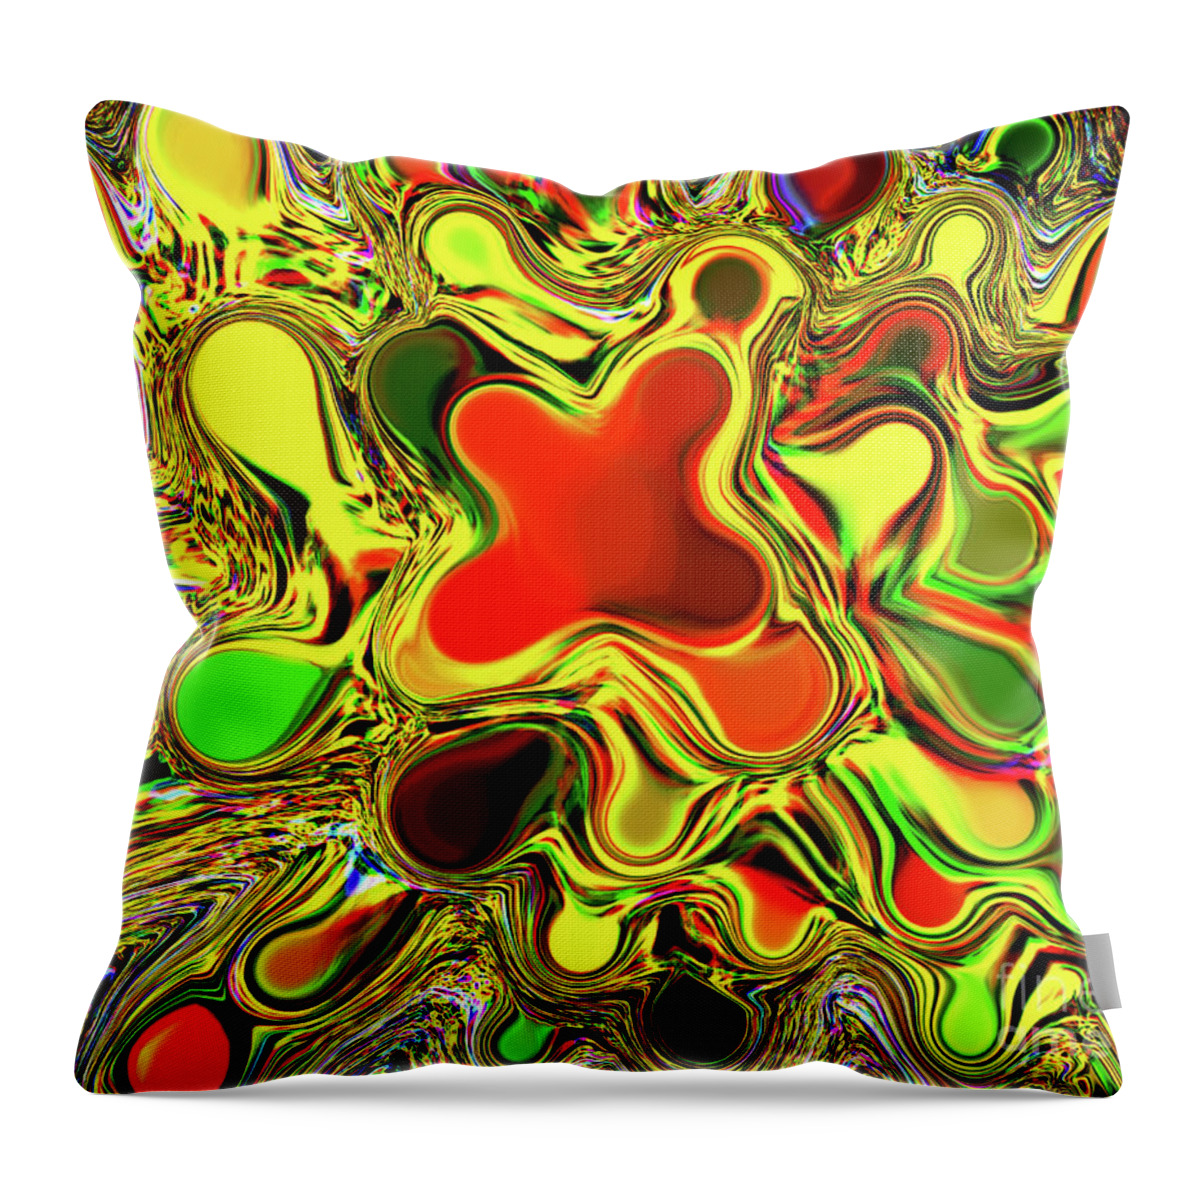 Orange Throw Pillow featuring the photograph Paint Ball Color Explosion by Andee Design